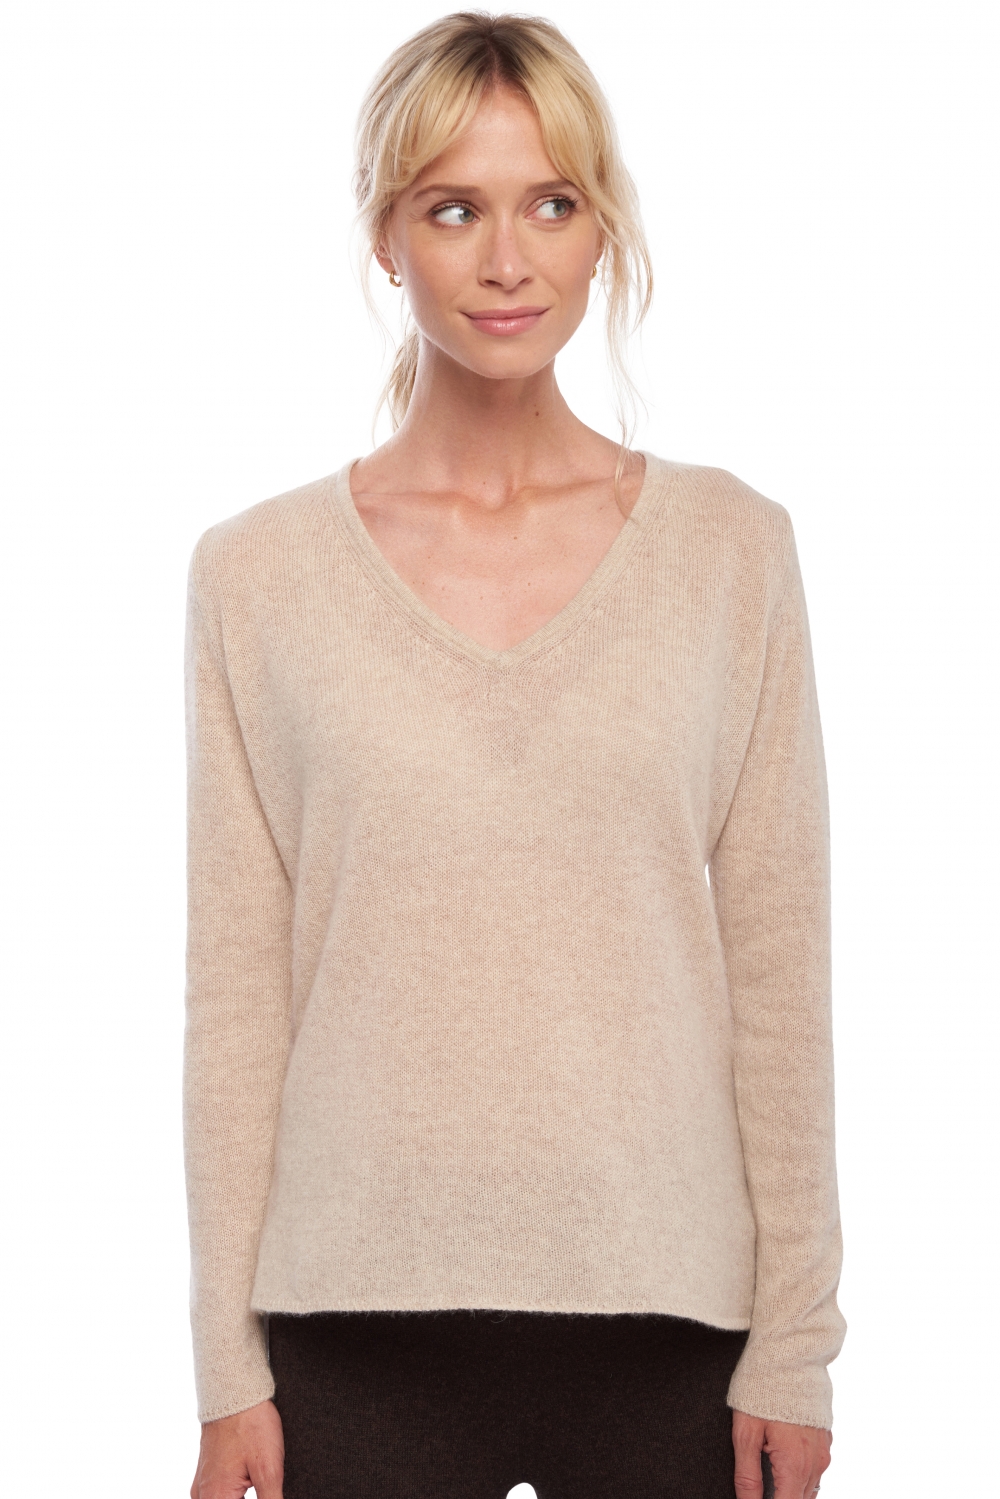 Cashmere ladies basic sweaters at low prices flavie natural beige s